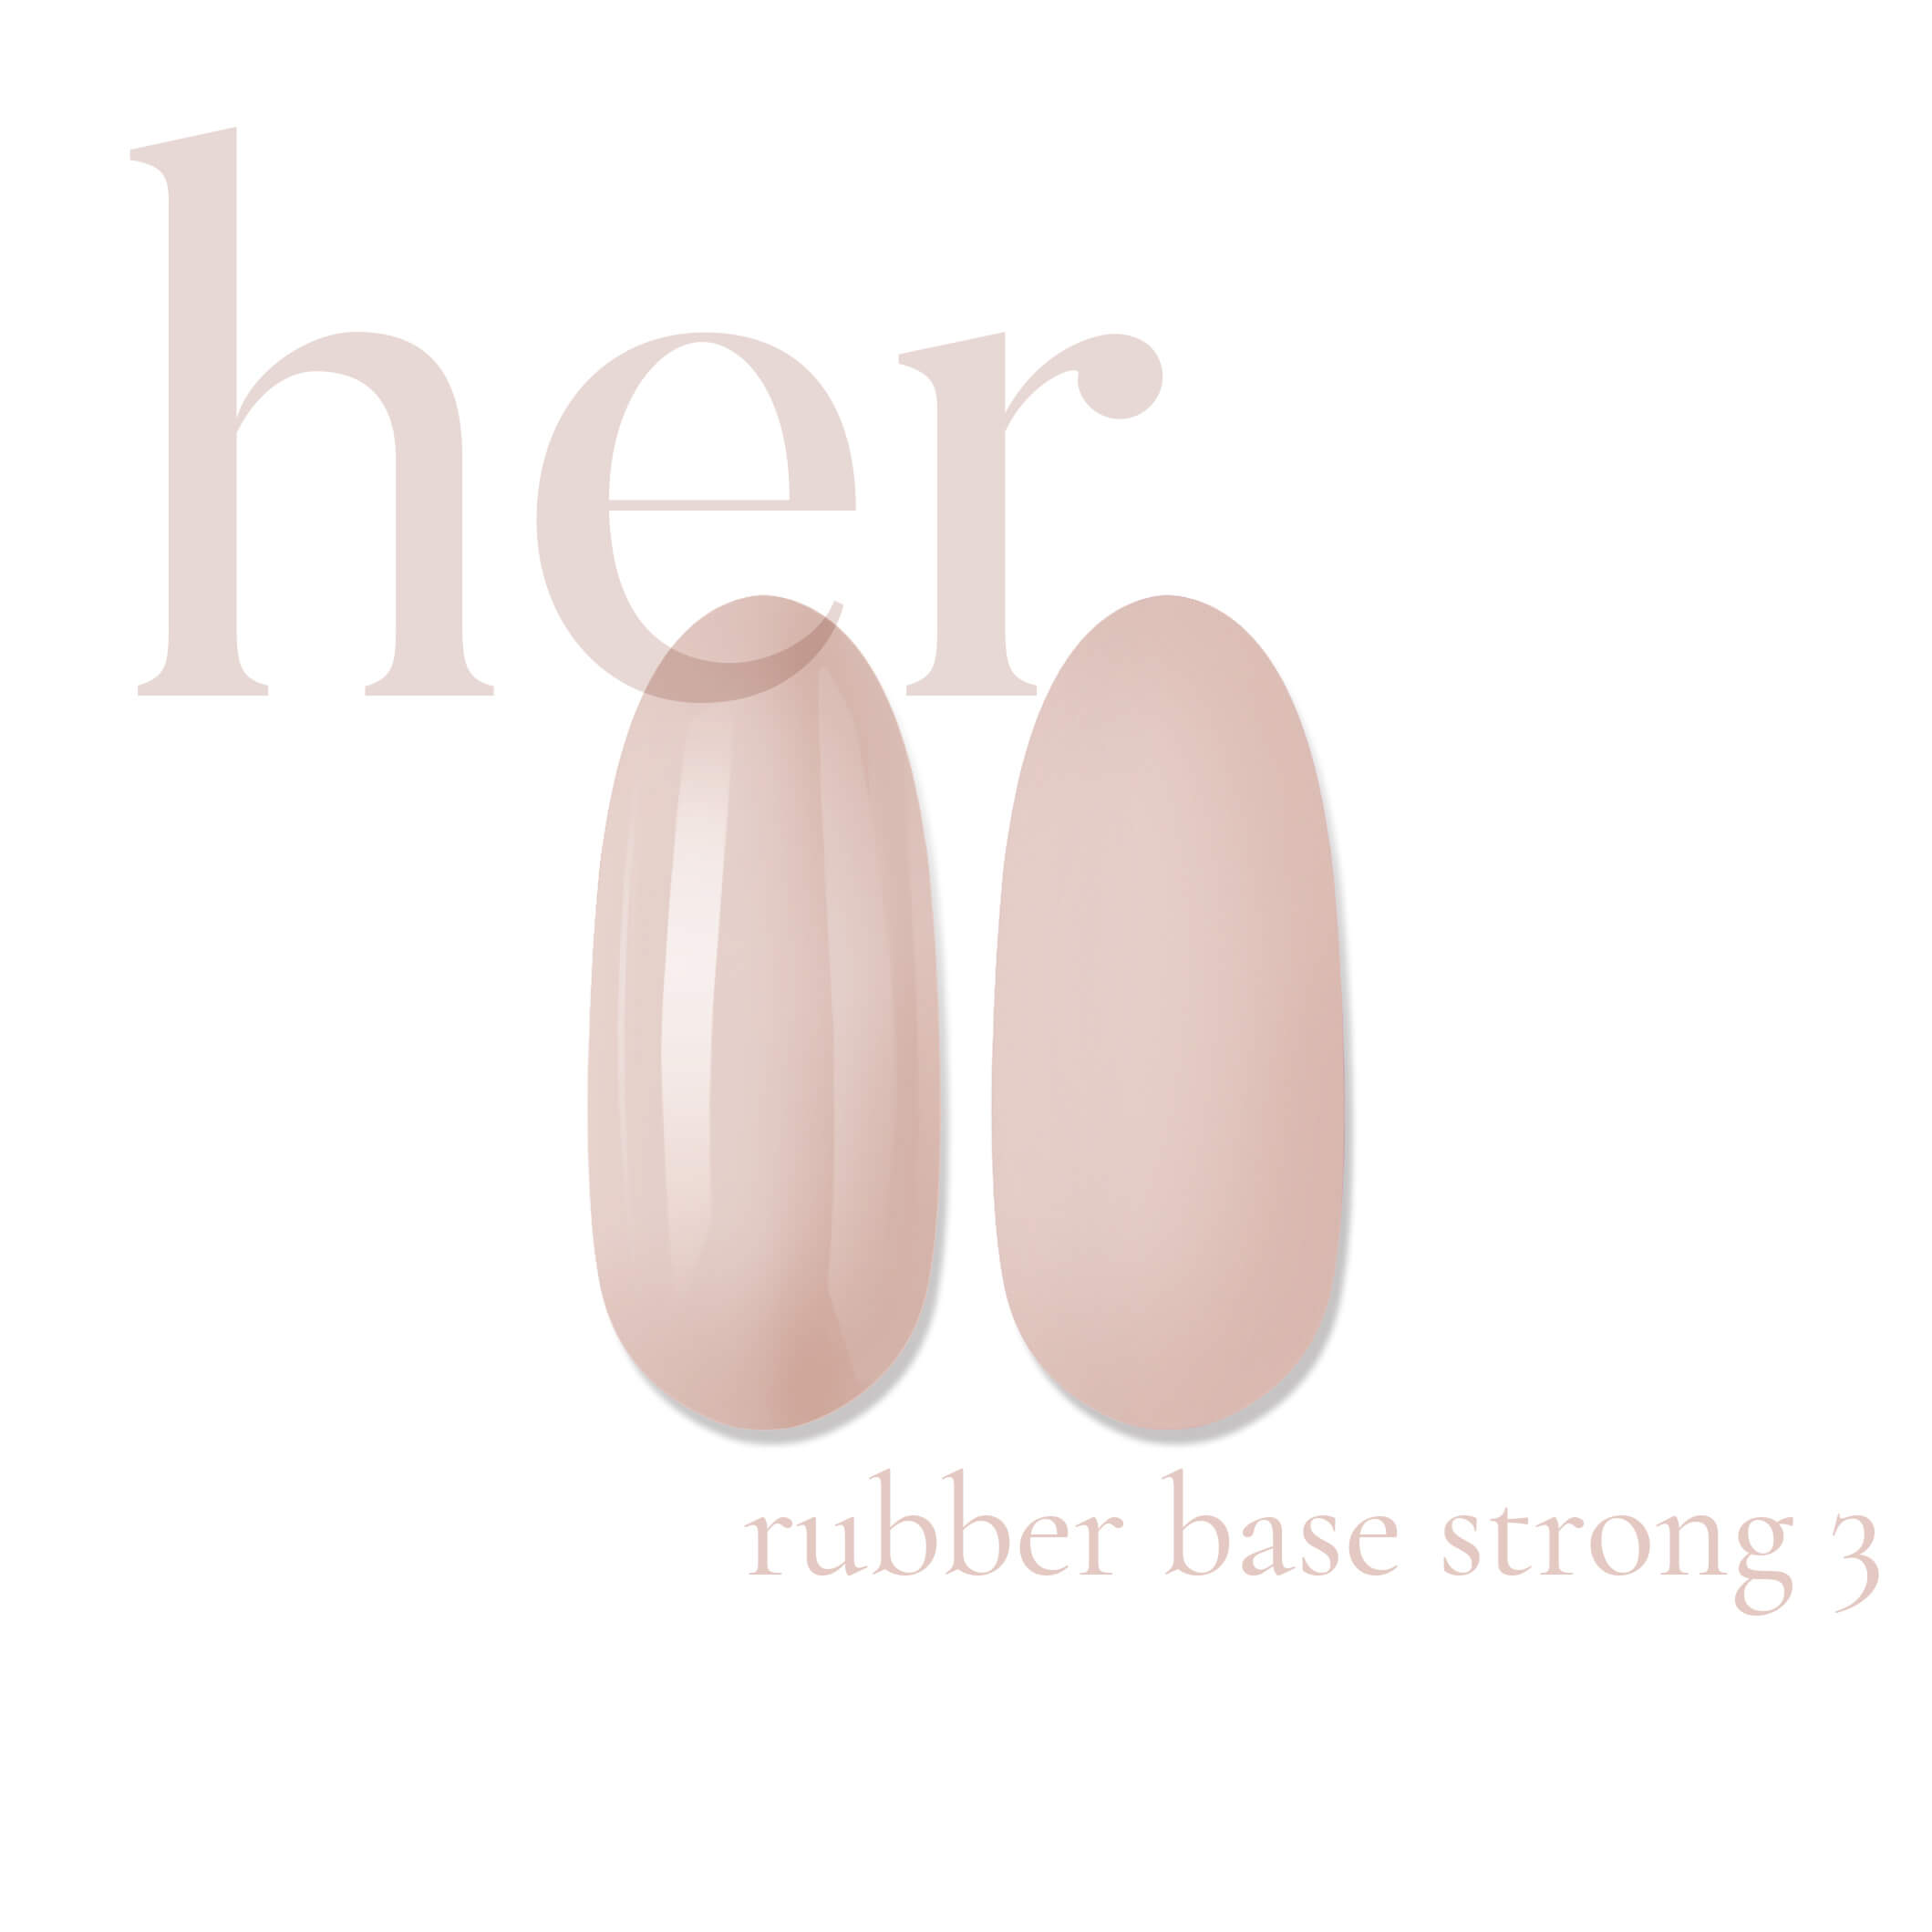 Rubber Baes STRONG 03